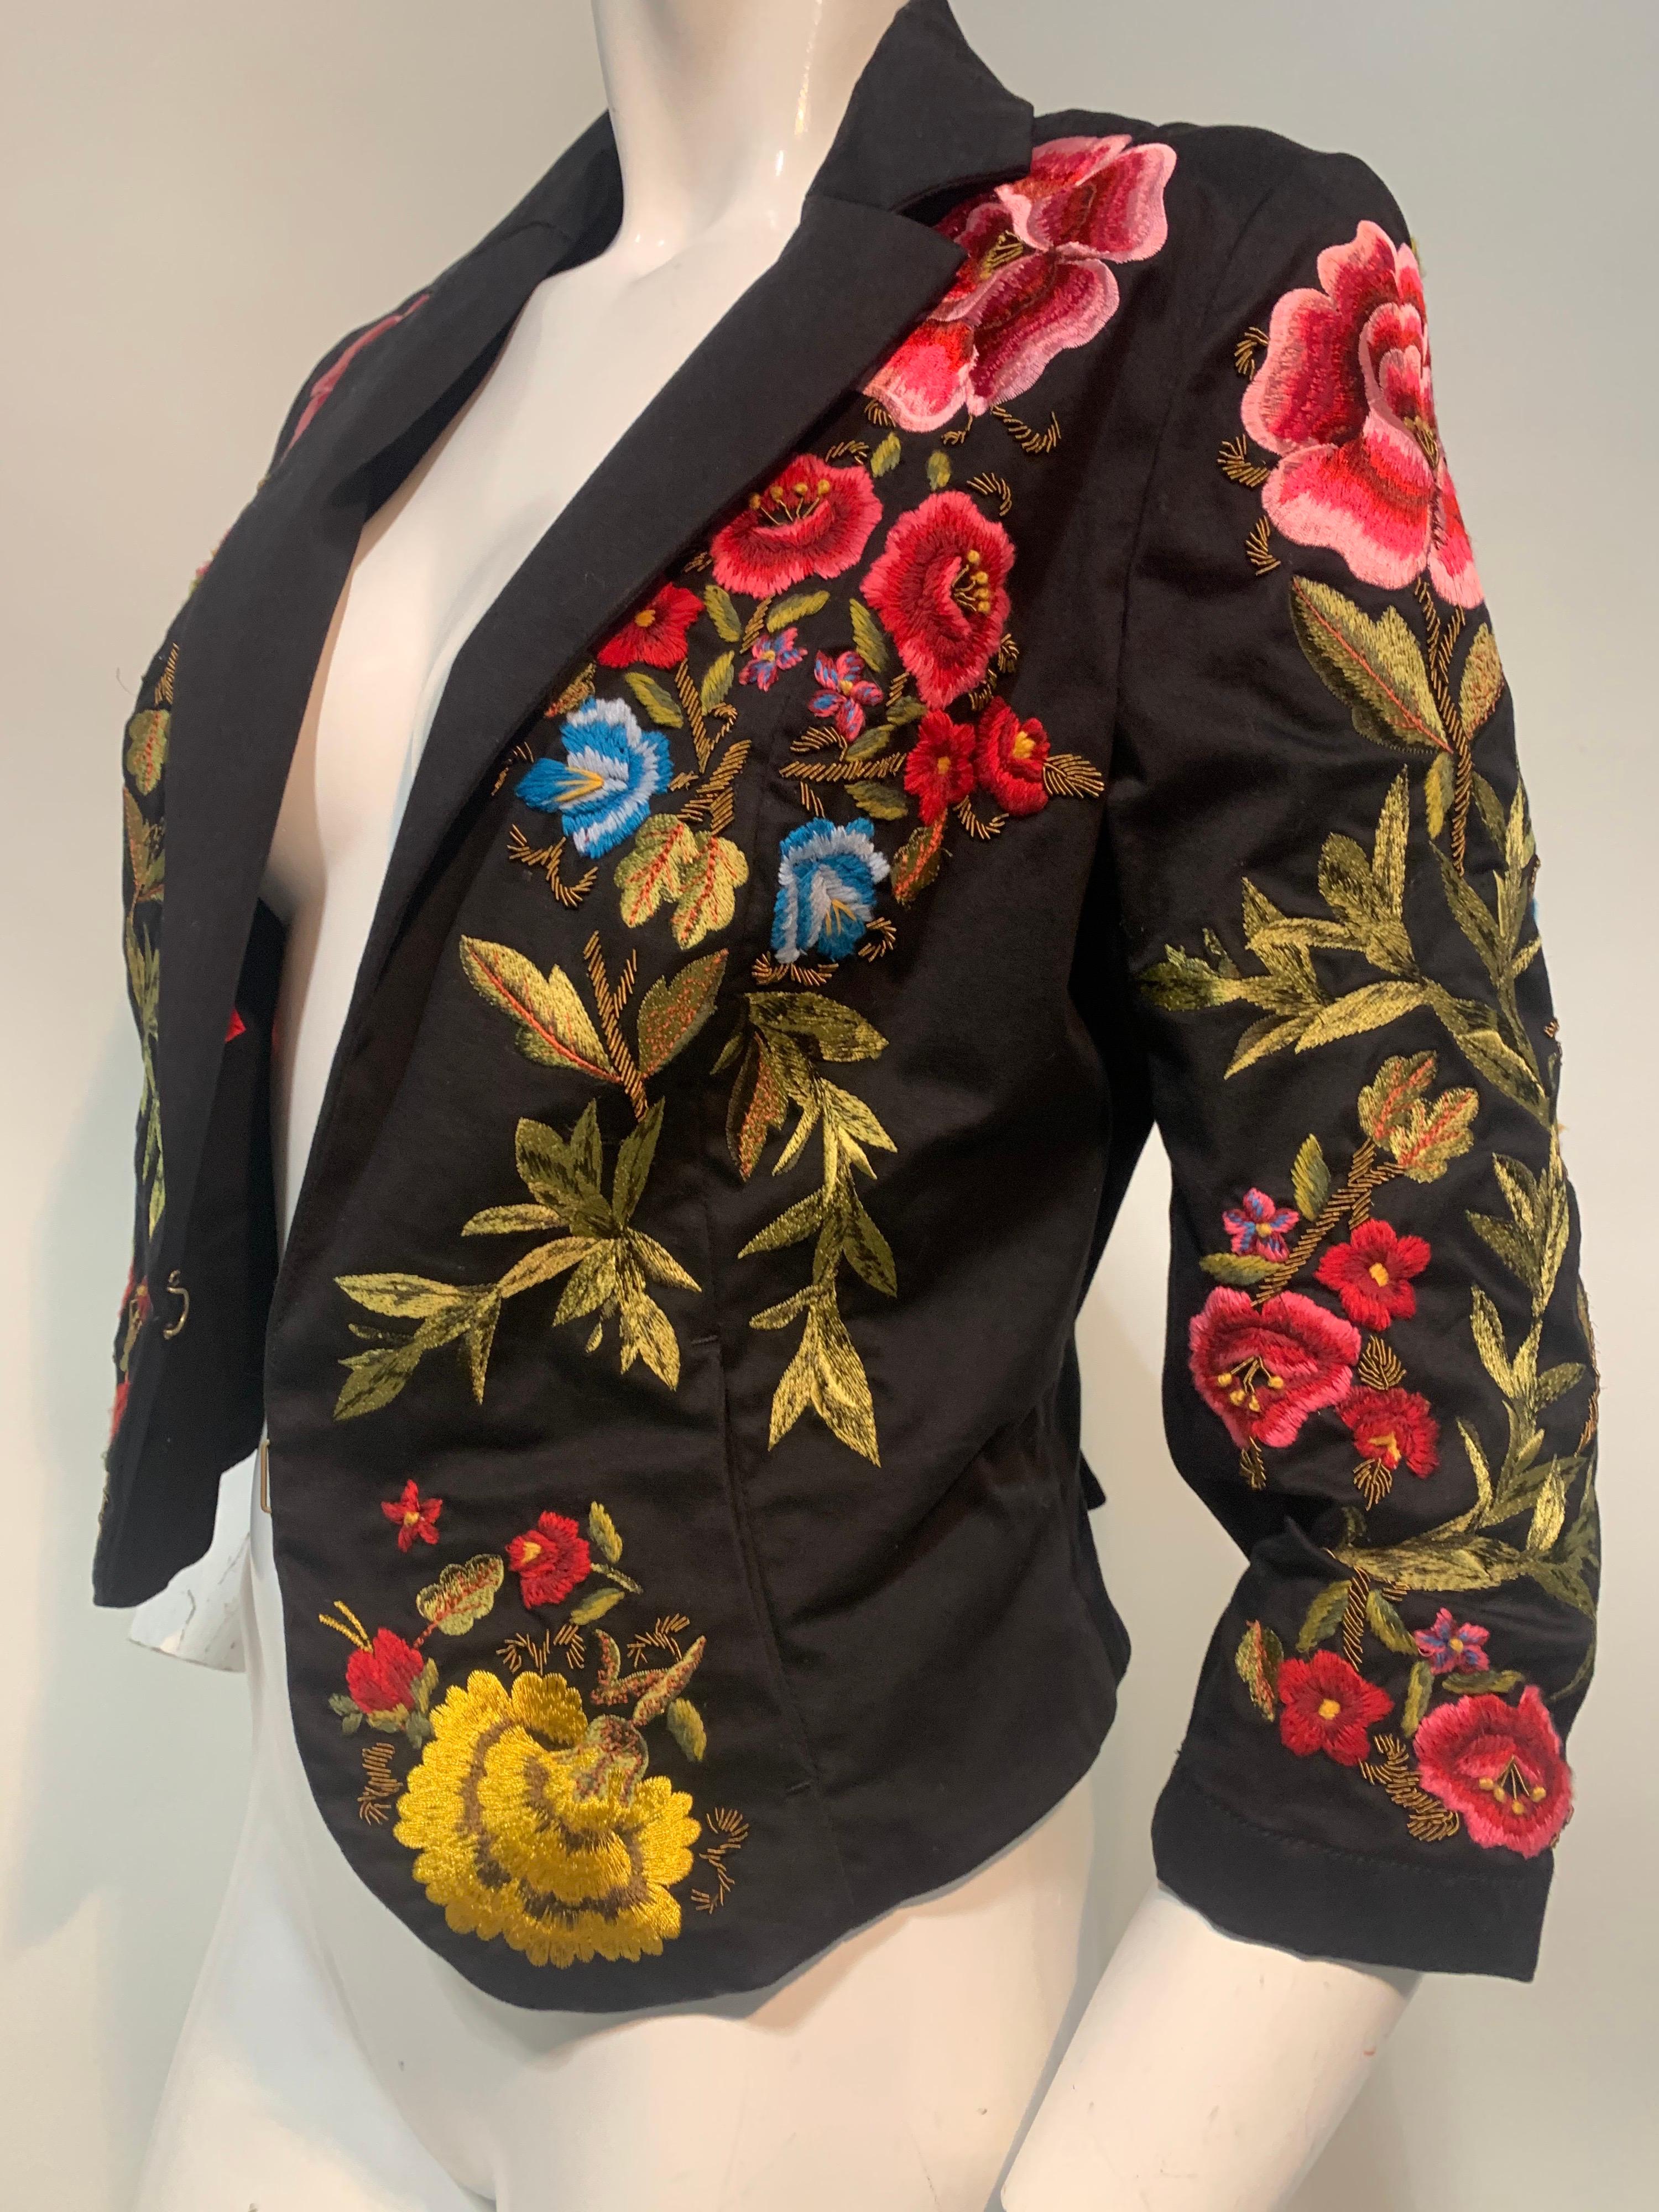 1990s Christian Lacroix Matador-Inspired Black Satin Jacket w/ Floral Embroidery 1